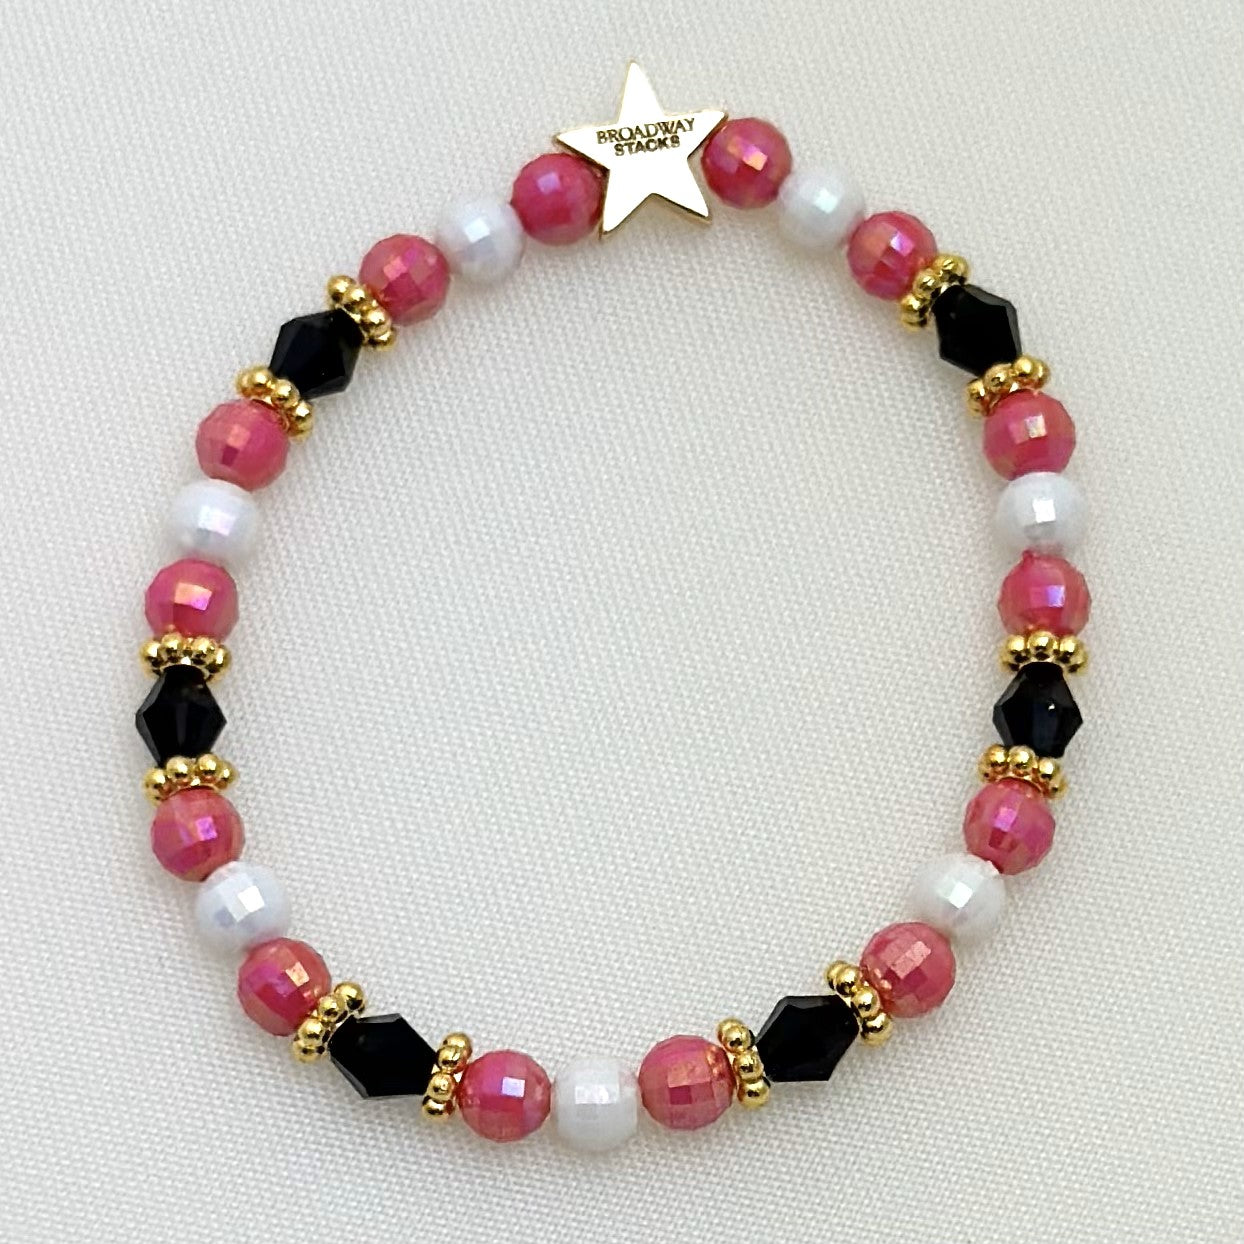 Broadway Stacks POTUS collection. 3 stretch bracelets included in Stack. Pinks, white, blue, golds and black colored beads. Letter beads that spell show quotes. Broadway Stacks gold star logo bead on back.